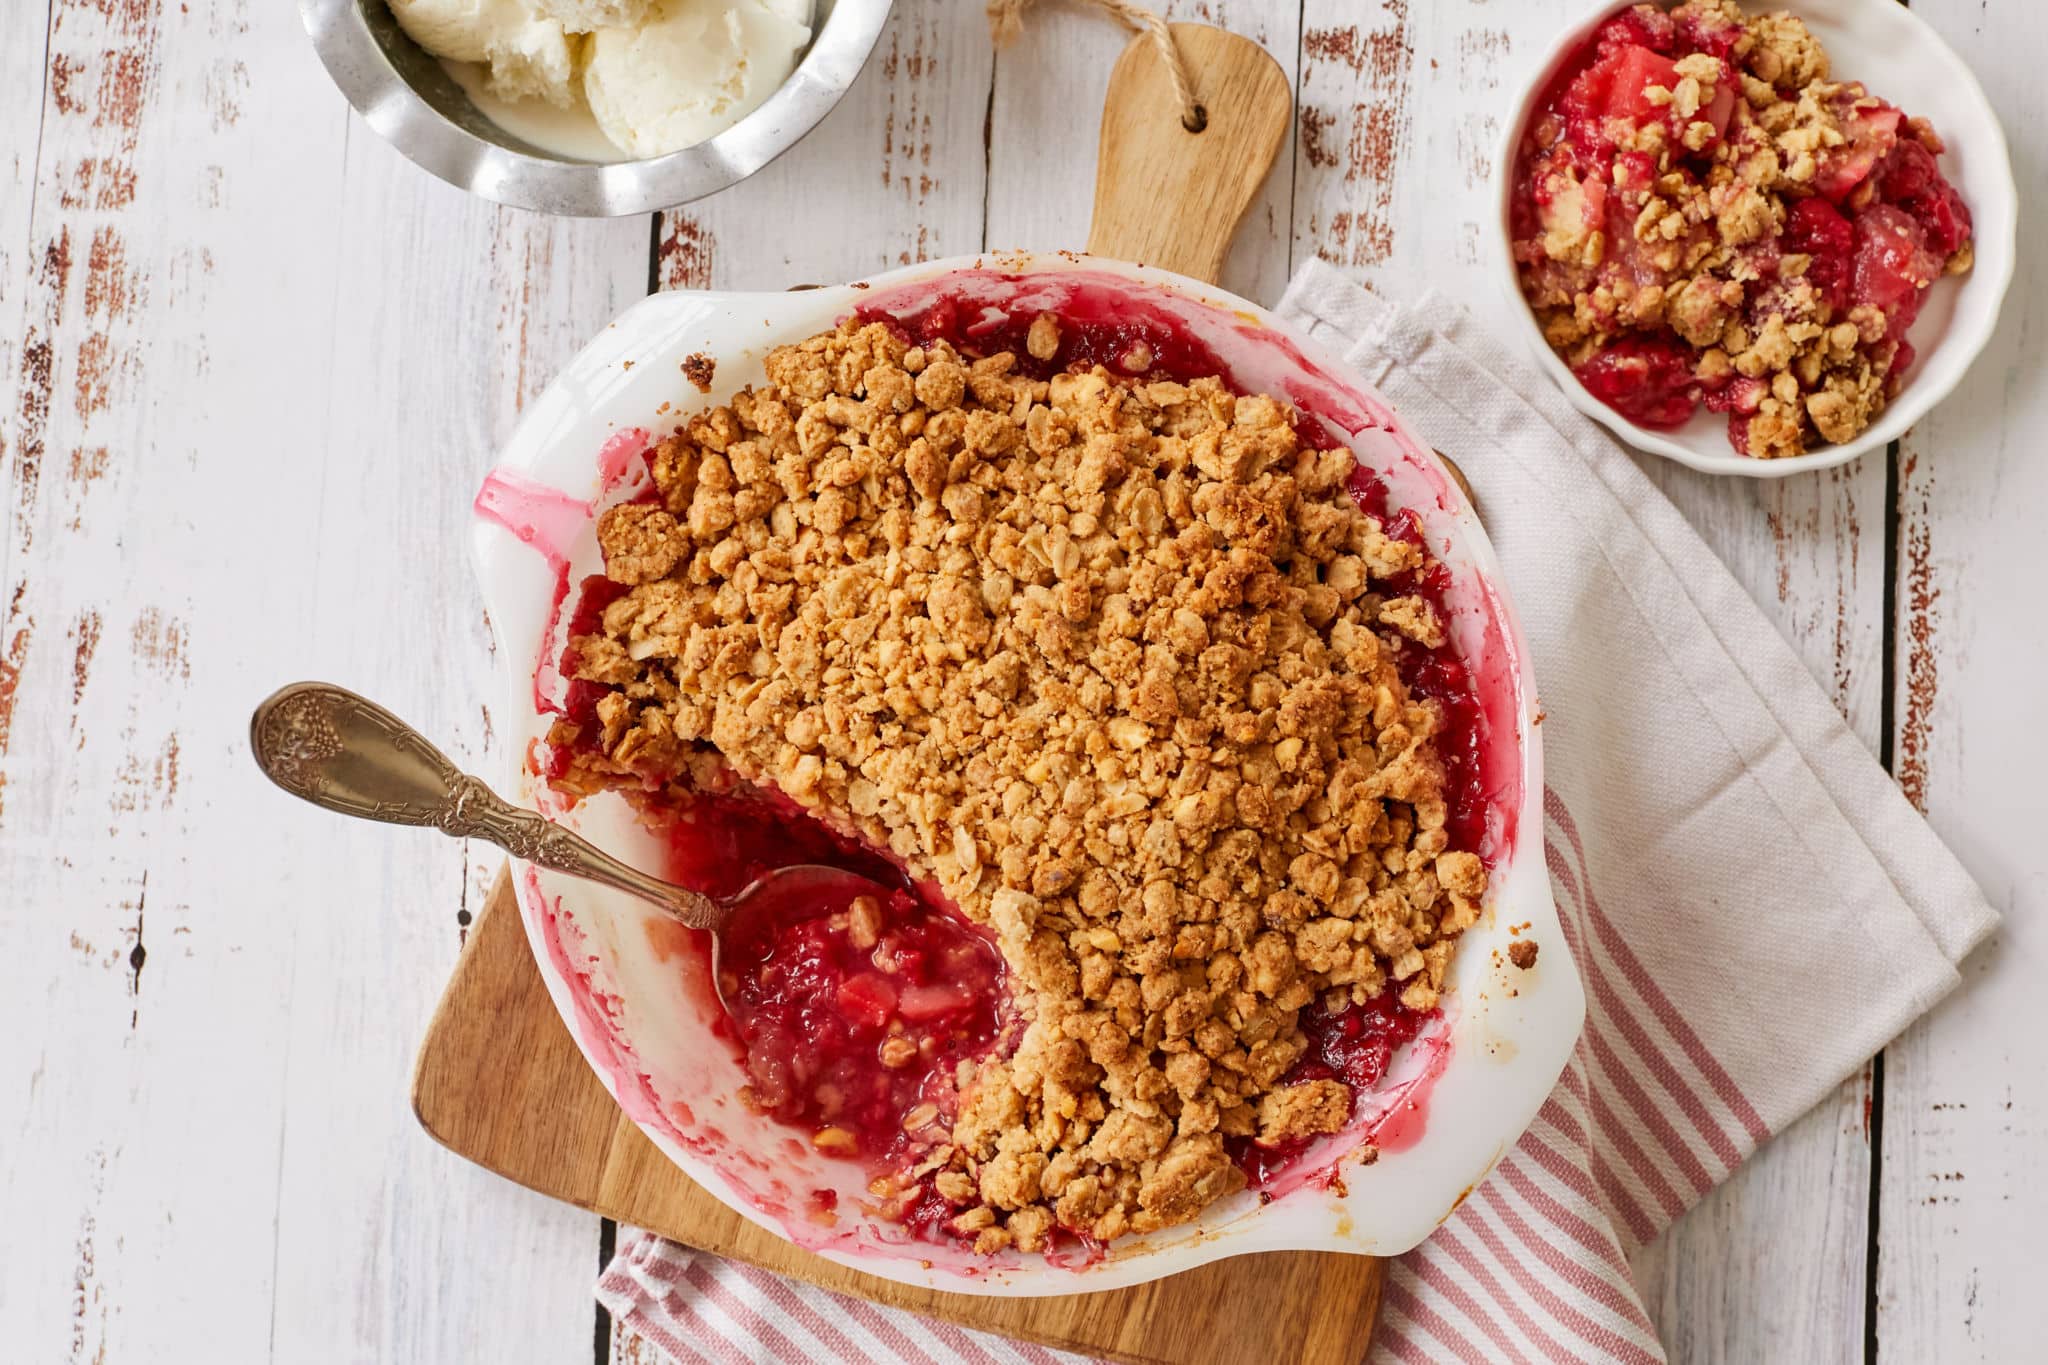 Peanut Butter and Jelly Crisp in a baking dish